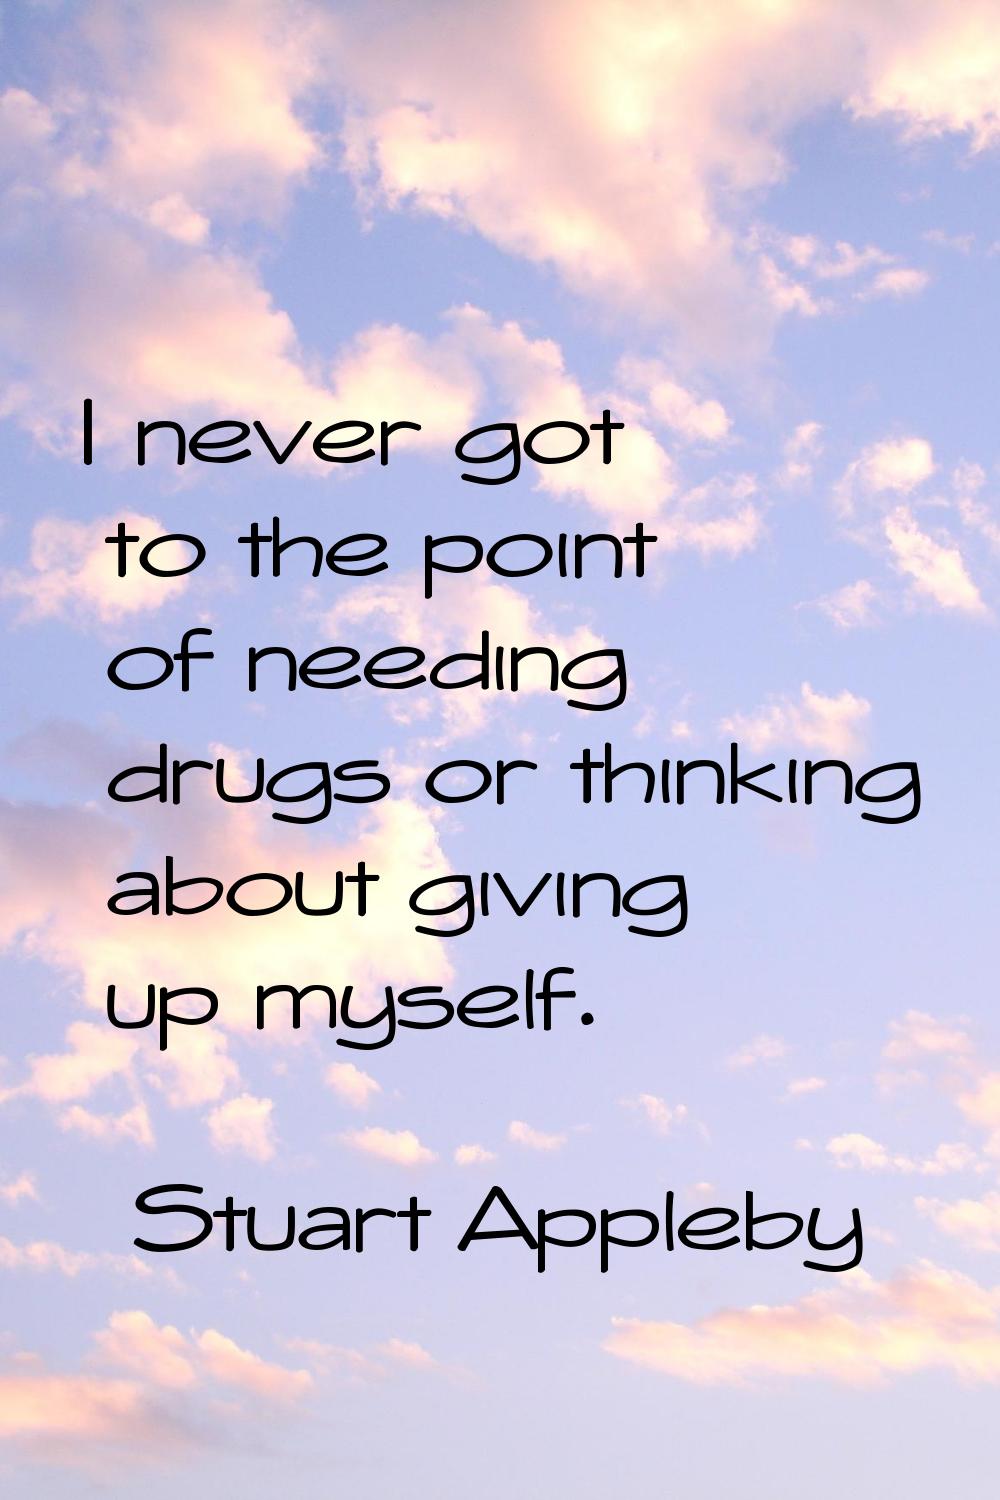 I never got to the point of needing drugs or thinking about giving up myself.